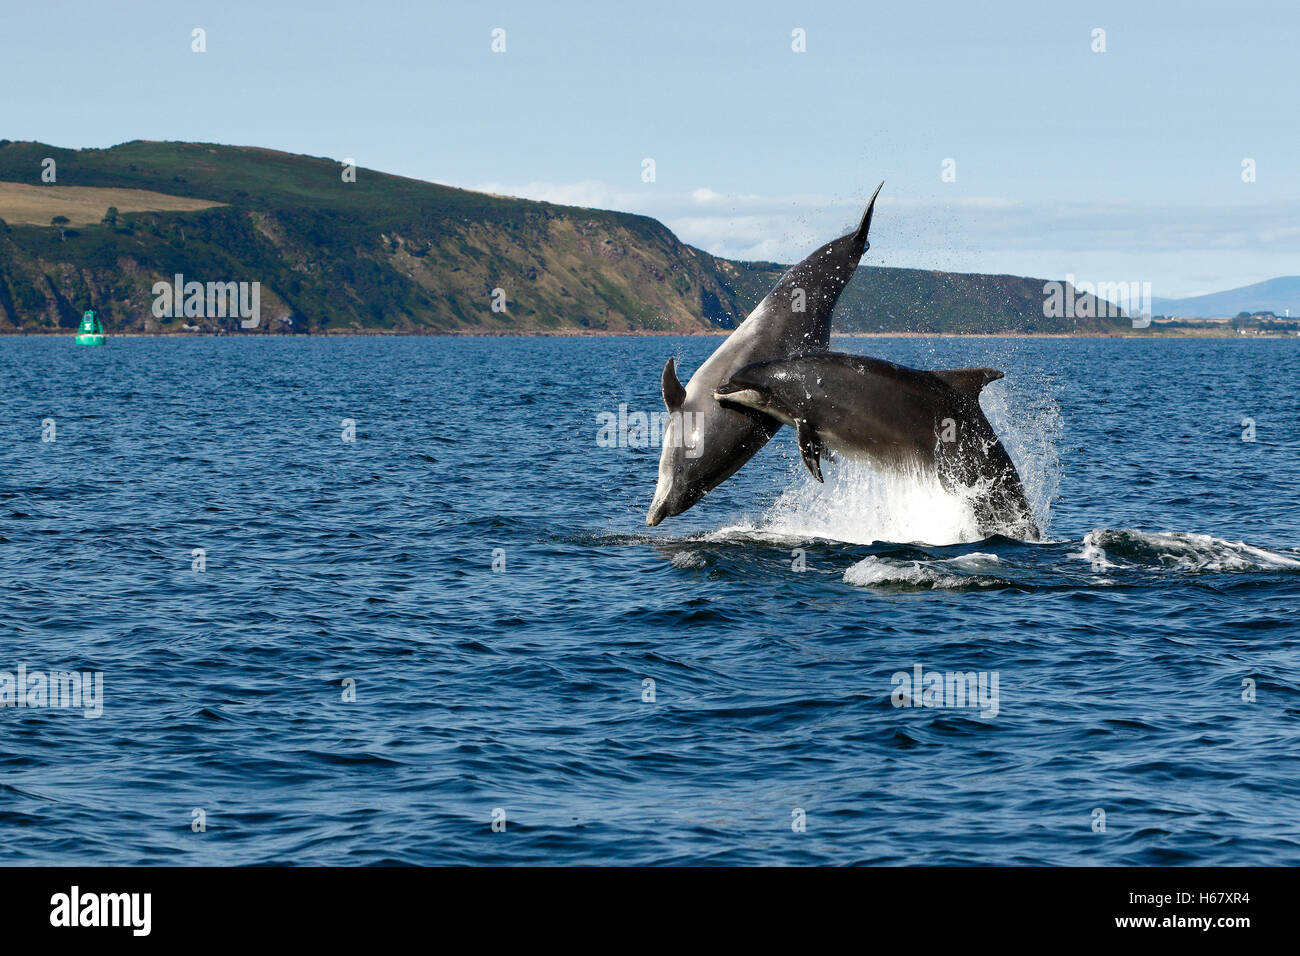 Two adult Bottlenose dolphins having fun breaching and leaping in calm blue sea where the Cromarty Firth meets the Moray Firth, Highlands of Scotland Stock Photo